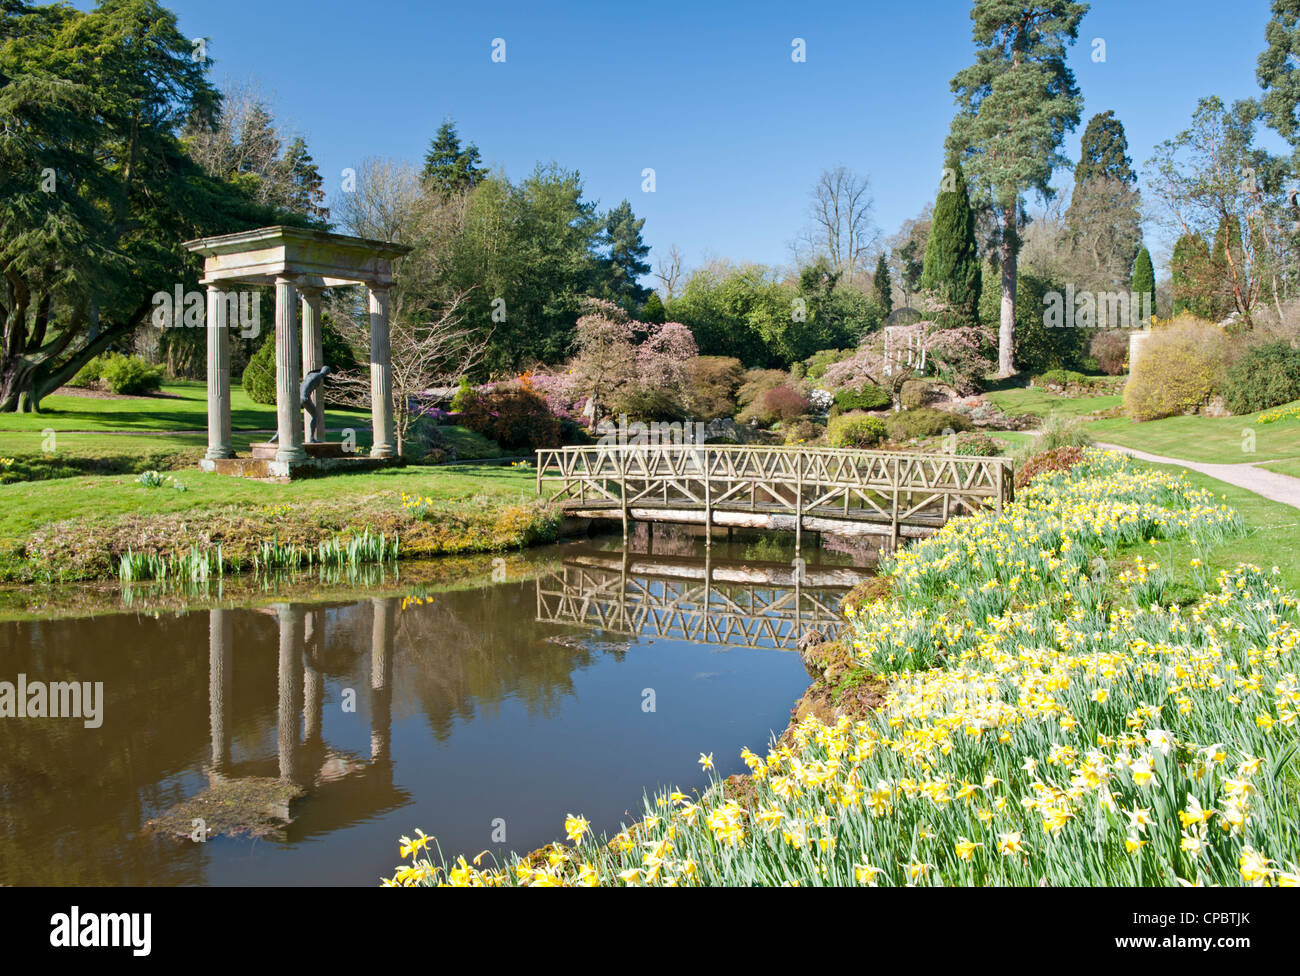 Daffodils in The Temple Garden in Spring, Cholmondeley Castle, Cholmondeley, Cheshire, England, UK Stock Photo